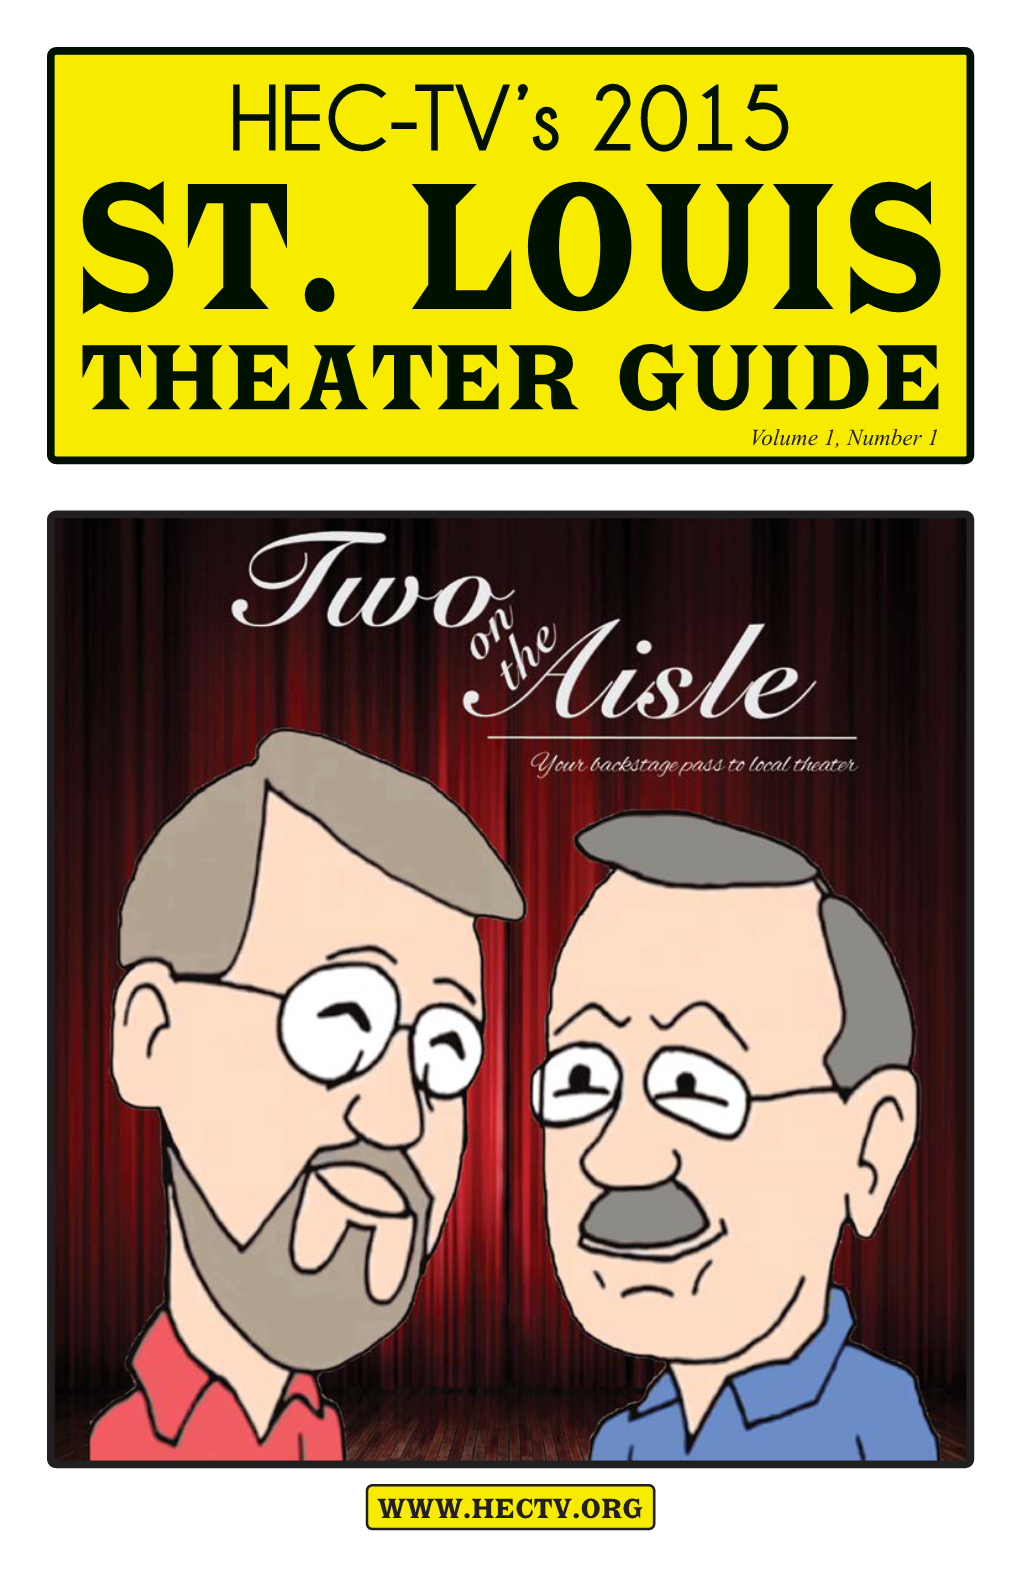 HEC-TV's 2015 THEATER GUIDE